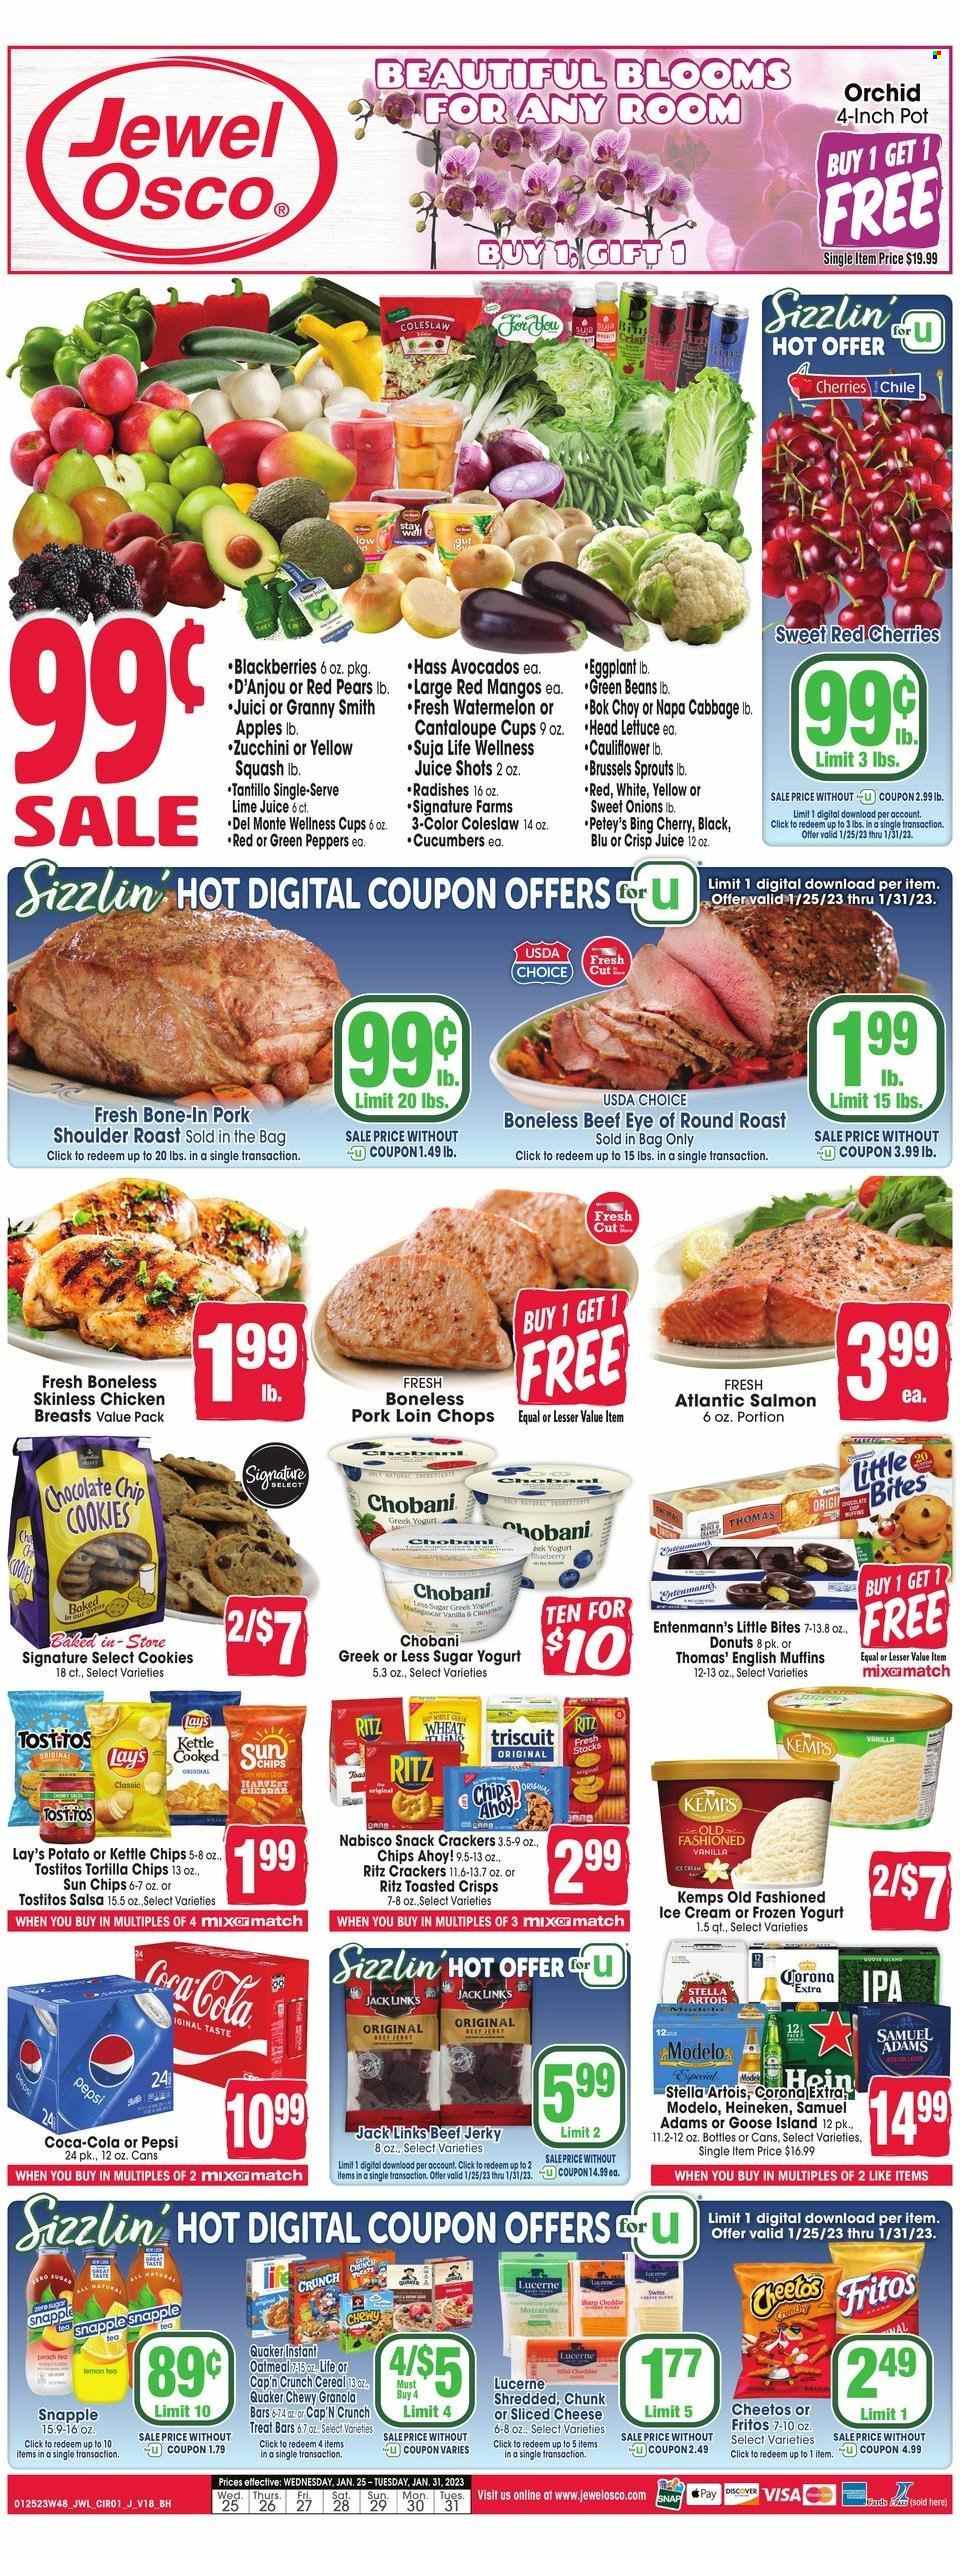 Jewel Osco Flyer - 01/25/2023 - 01/31/2023 - Sales products - english muffins, donut, Entenmann's, beans, bok choy, cabbage, cucumbers, green beans, radishes, zucchini squash, lettuce, peppers, eggplant, brussels sprout, yellow squash, apples, avocado, blackberries, mango, watermelon, cherries, pears, Granny Smith apple, salmon, coleslaw, Quaker, beef jerky, jerky, sliced cheese, cheese, Kemps, greek yoghurt, yoghurt, Chobani, ice cream, cookies, snack, crackers, Chips Ahoy!, Little Bites, RITZ, Fritos, tortilla chips, Cheetos, Lay's, kettle, Tostitos, oatmeal, Del Monte, cereals, granola bar, Cap'n Crunch, salsa, Coca-Cola, Pepsi, Snapple, tea, beer, Stella Artois, Corona, Heineken, IPA, Modelo, chicken breasts, beef meat, eye of round, round roast, pork chops, pork loin, pork meat, pork roast, pork shoulder, pot, pan, cup, mixer. Page 1.